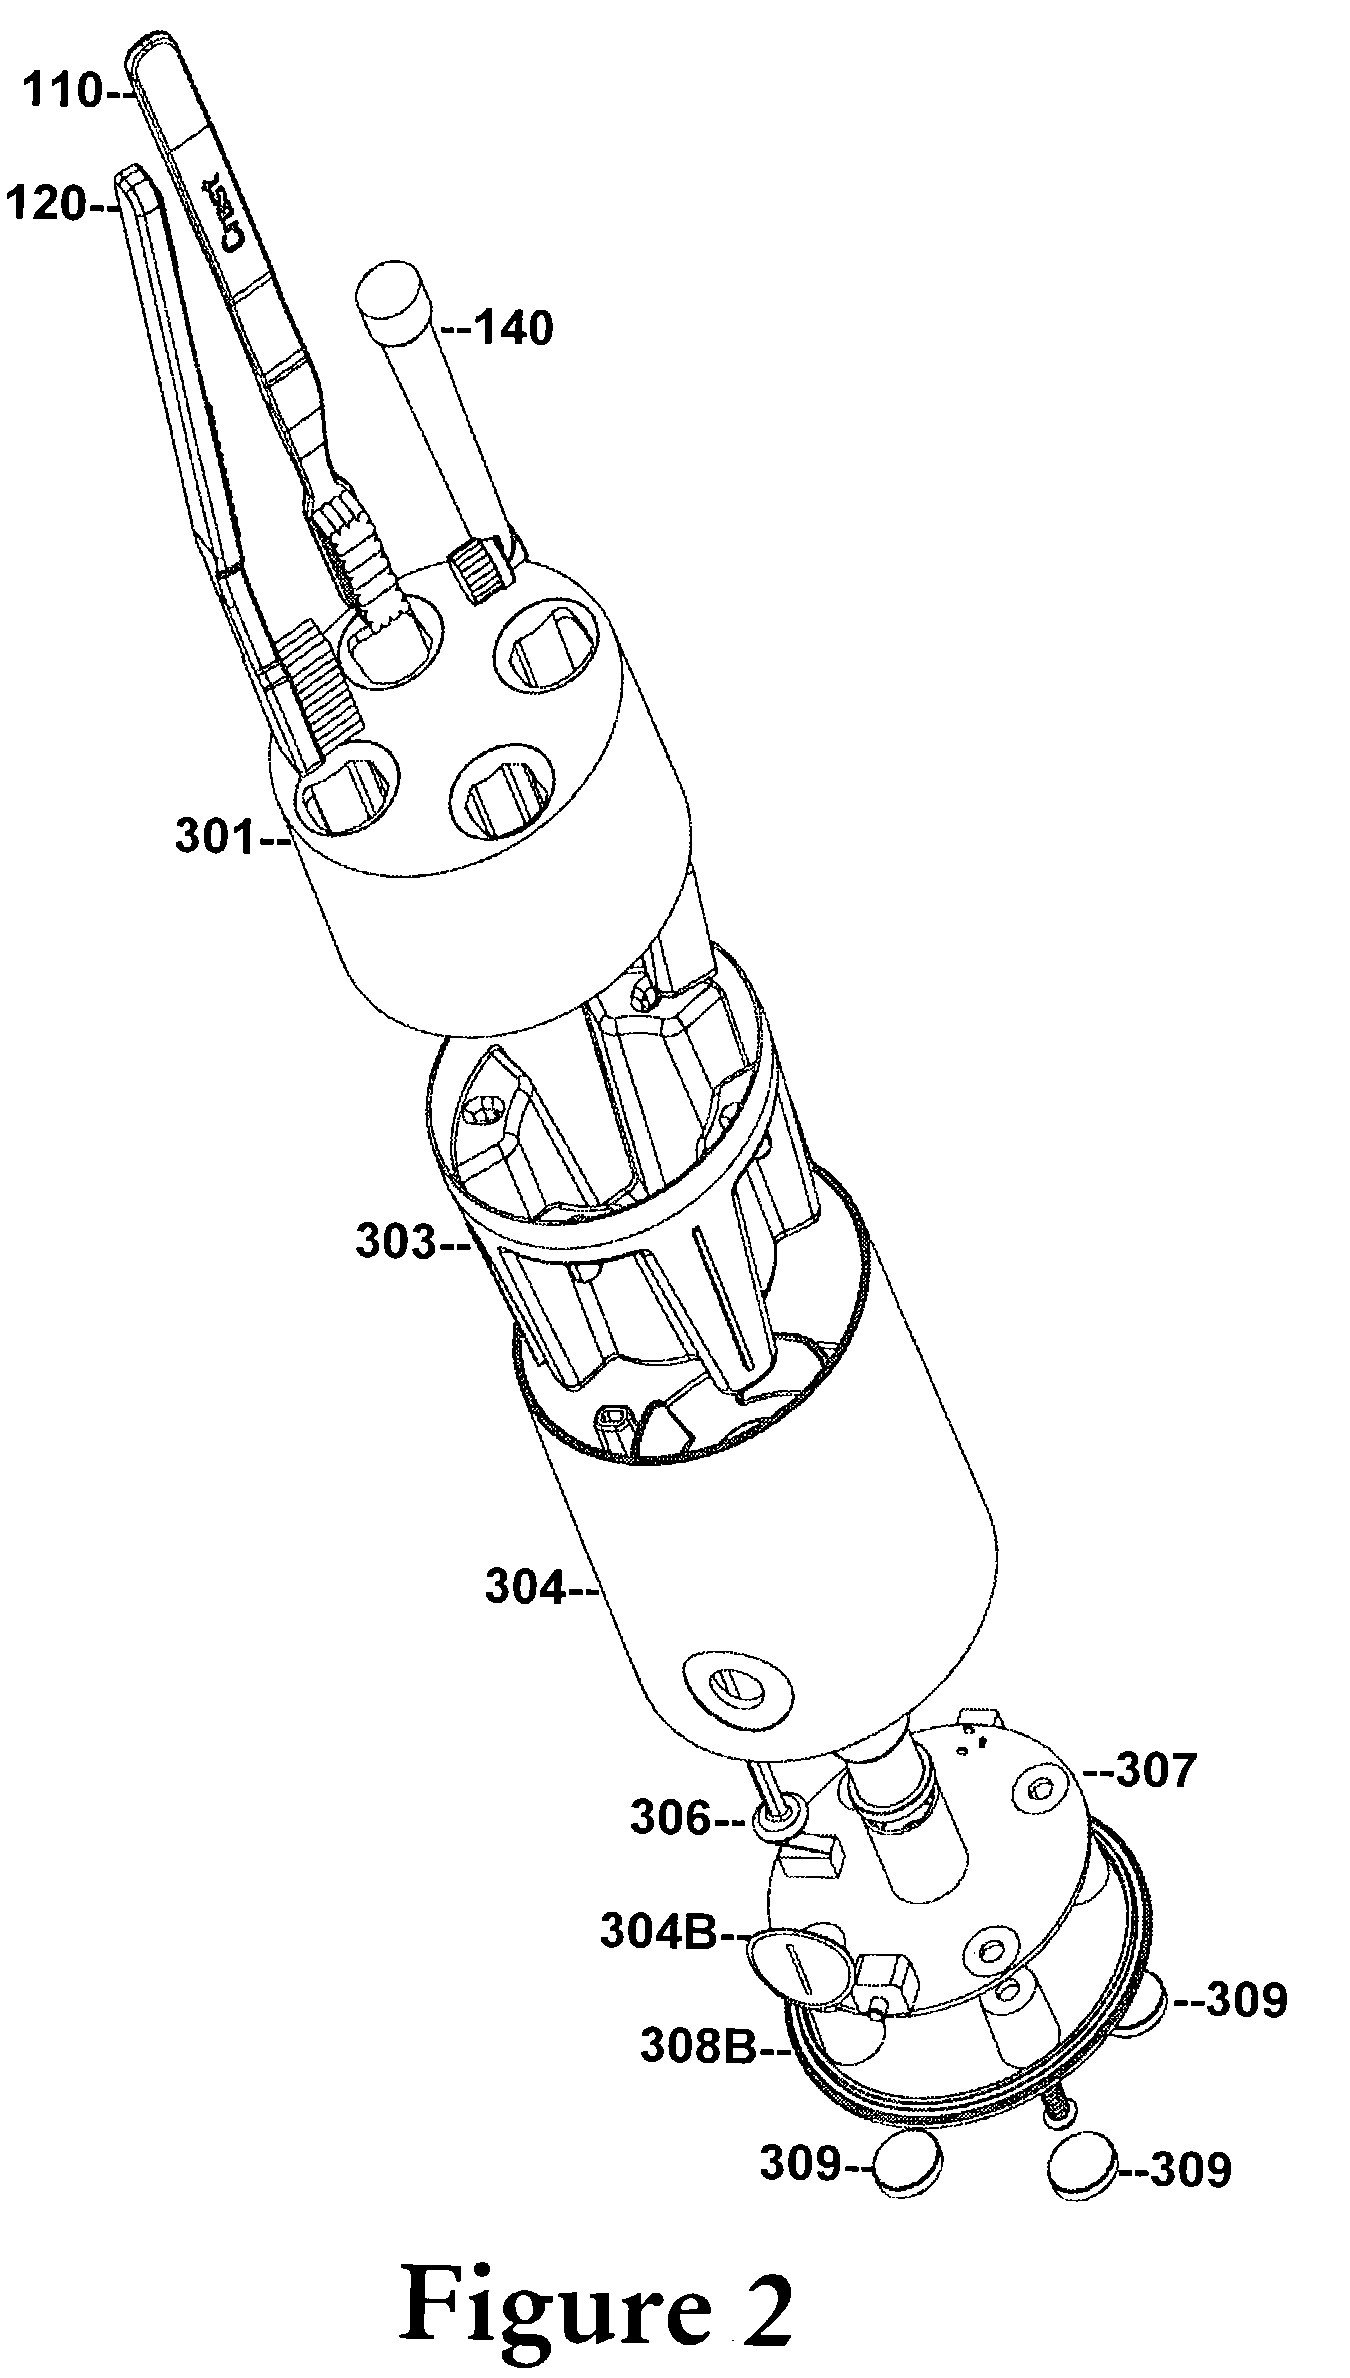 System and method for toothbrush sanitization and storage